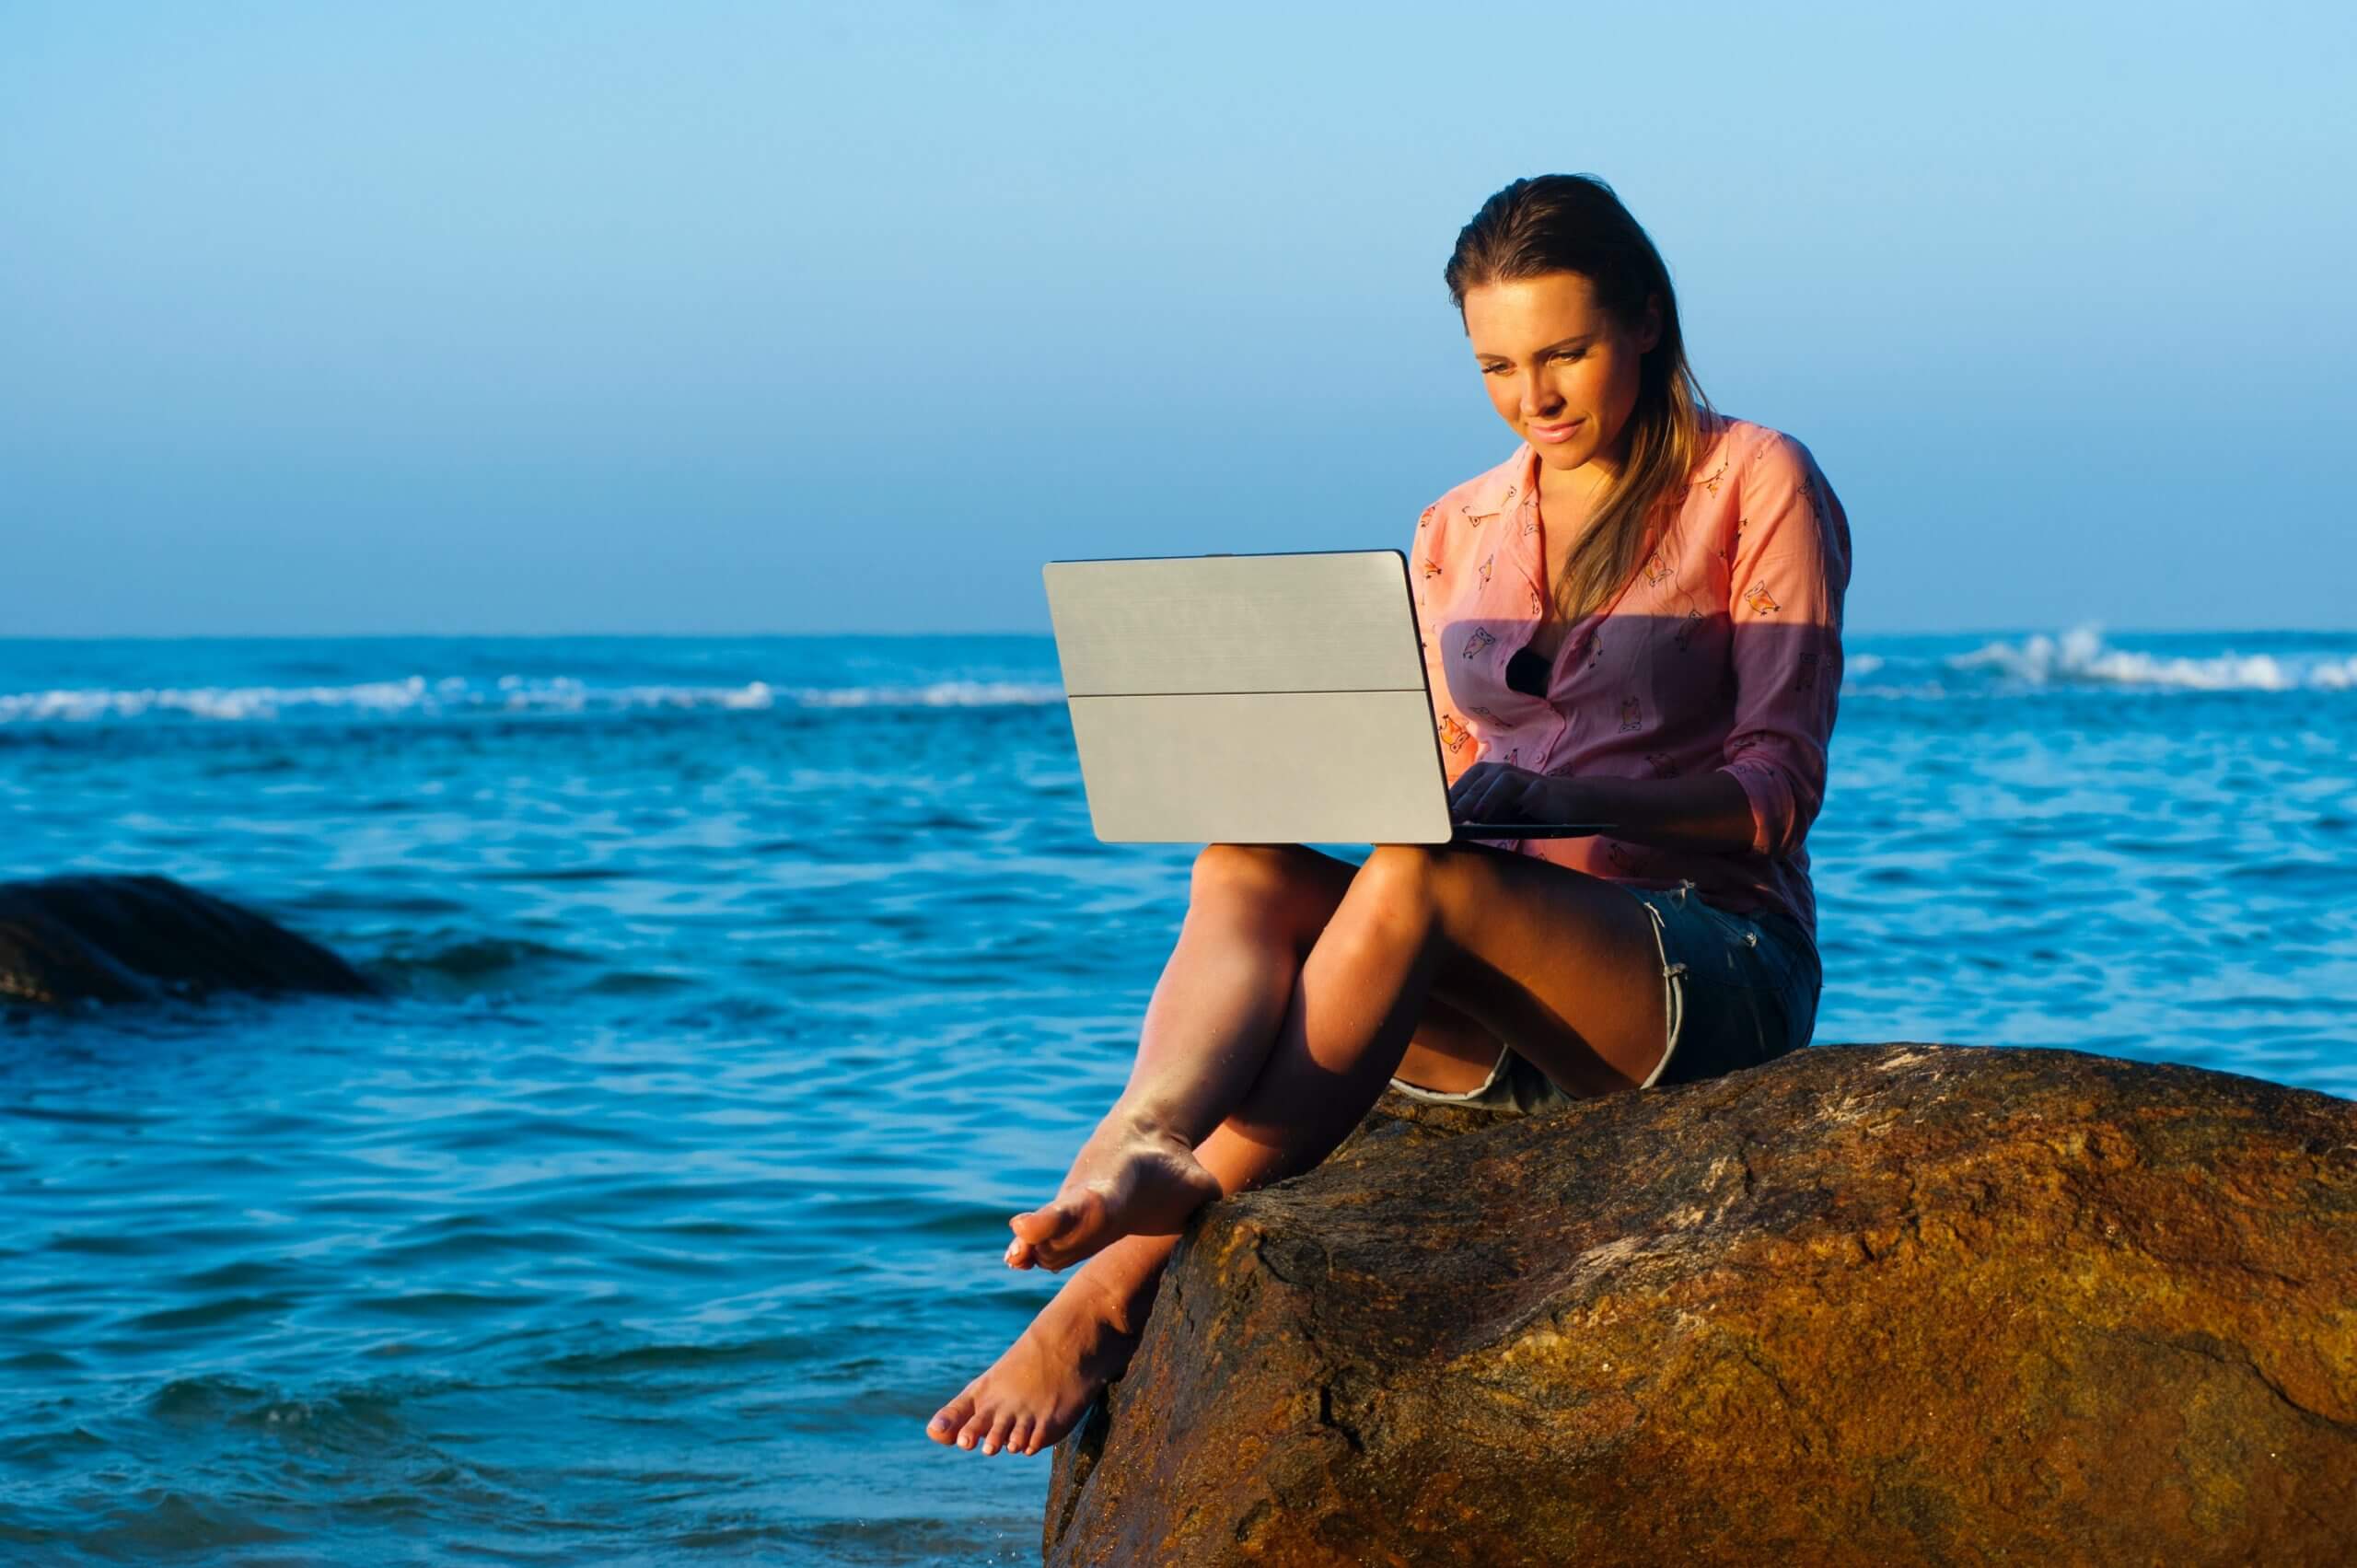 Five pitfalls of “workation”, that is combining work and vacation. 